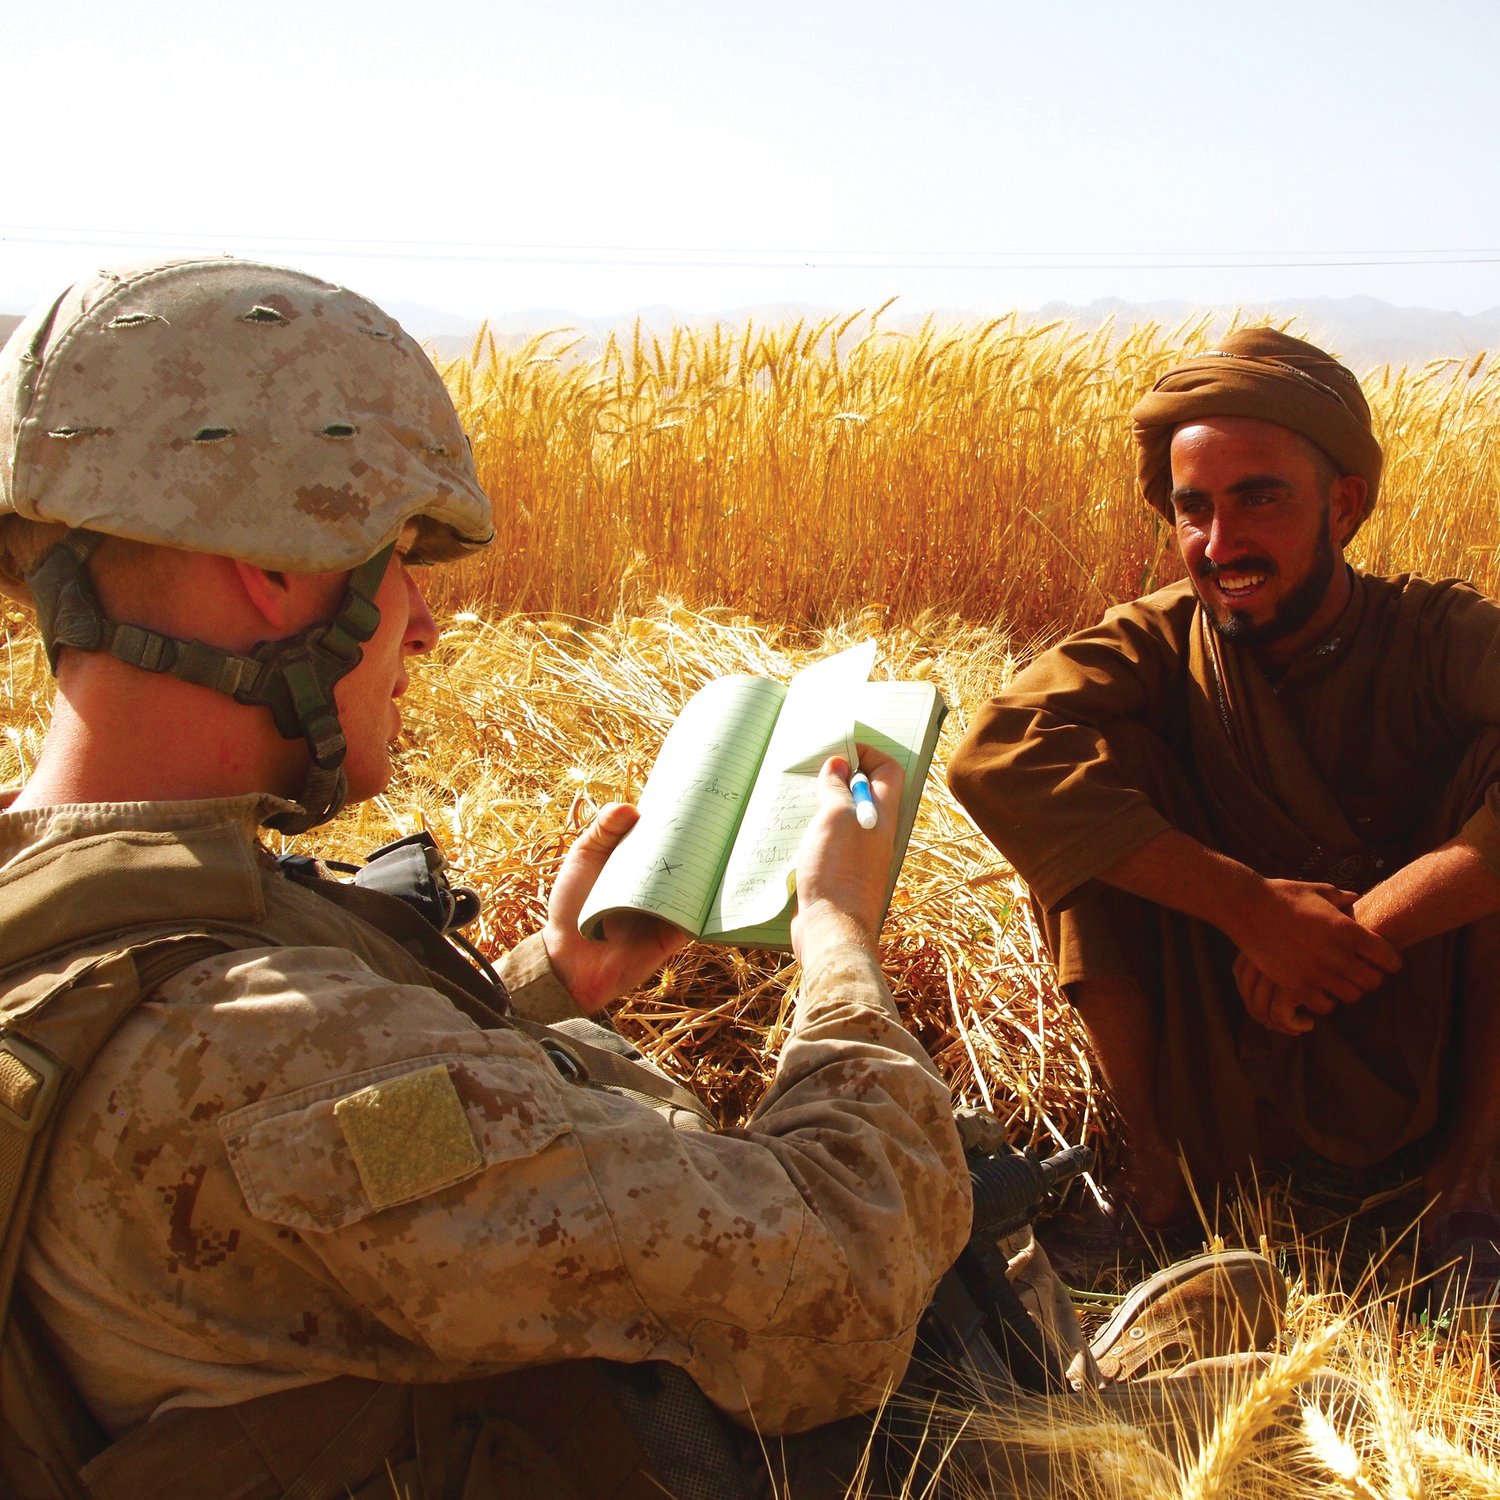 Zaque Harig speaks within an Afghan civilian while on deployment, utilizing his newly-learned knowledge of Pashto (one of the native languages in Afghanistan) to communicate with the man.